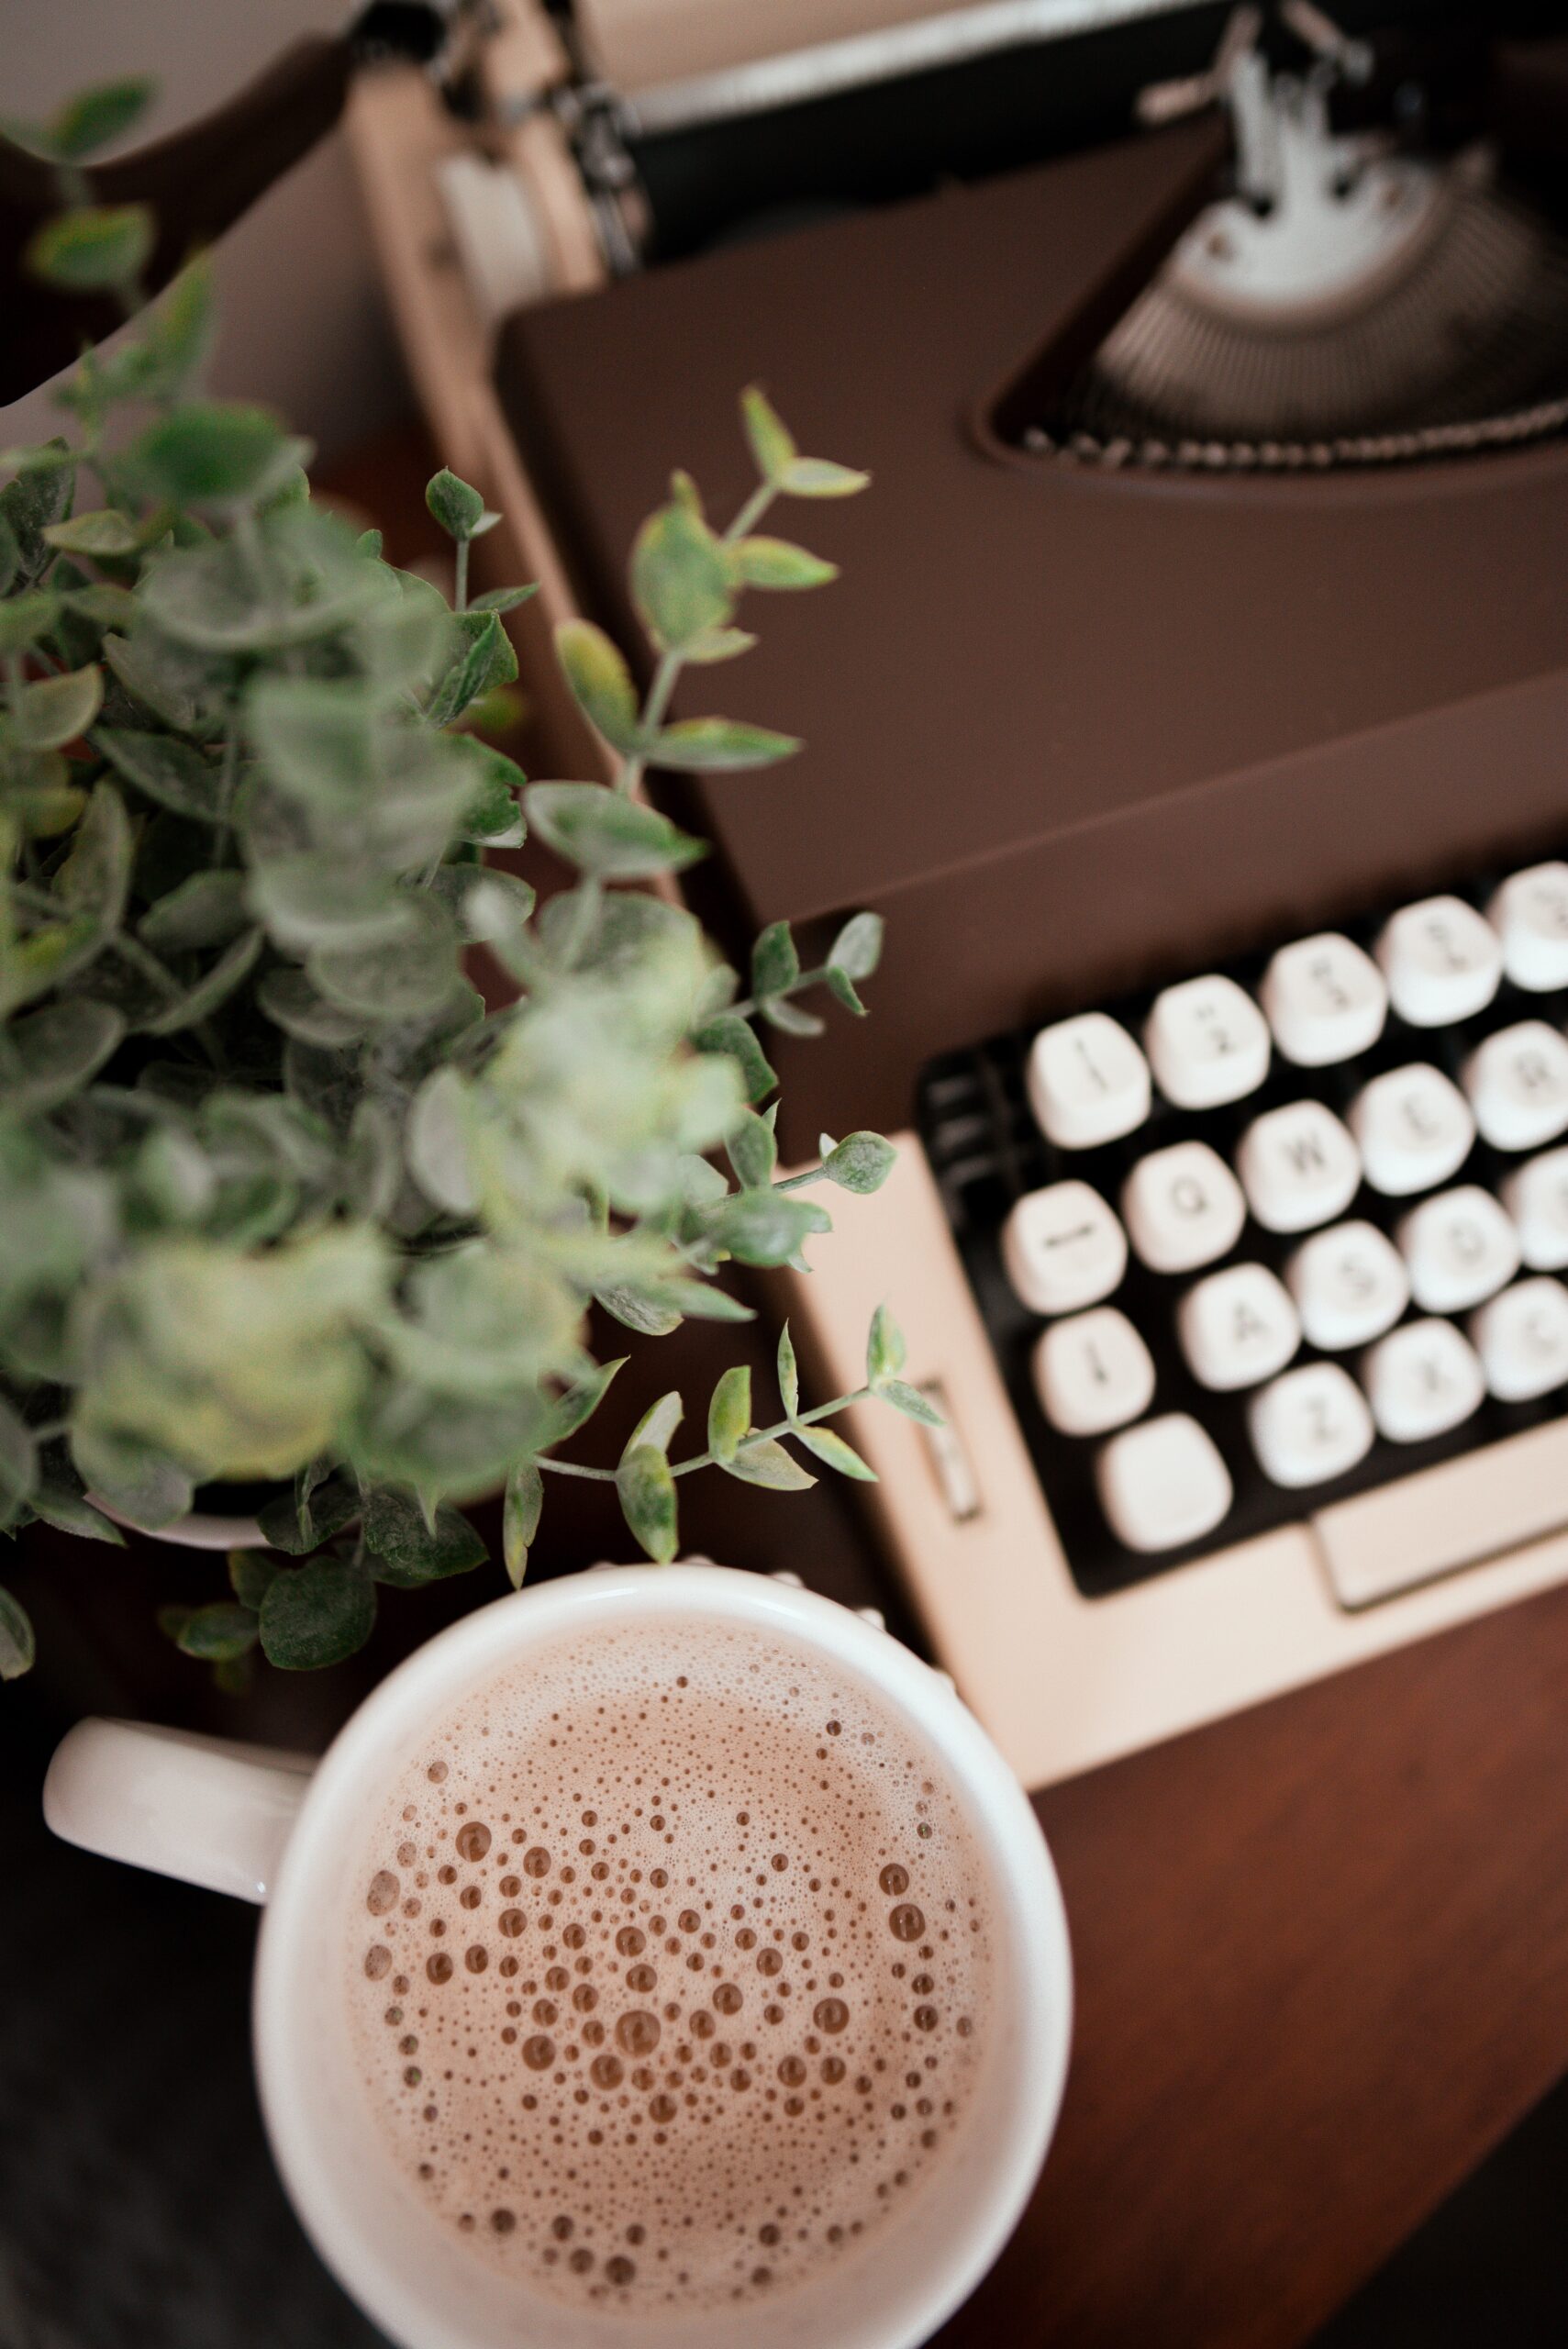 aesthetically pleasing cup of coffee, with a plant and brown and white typewriter